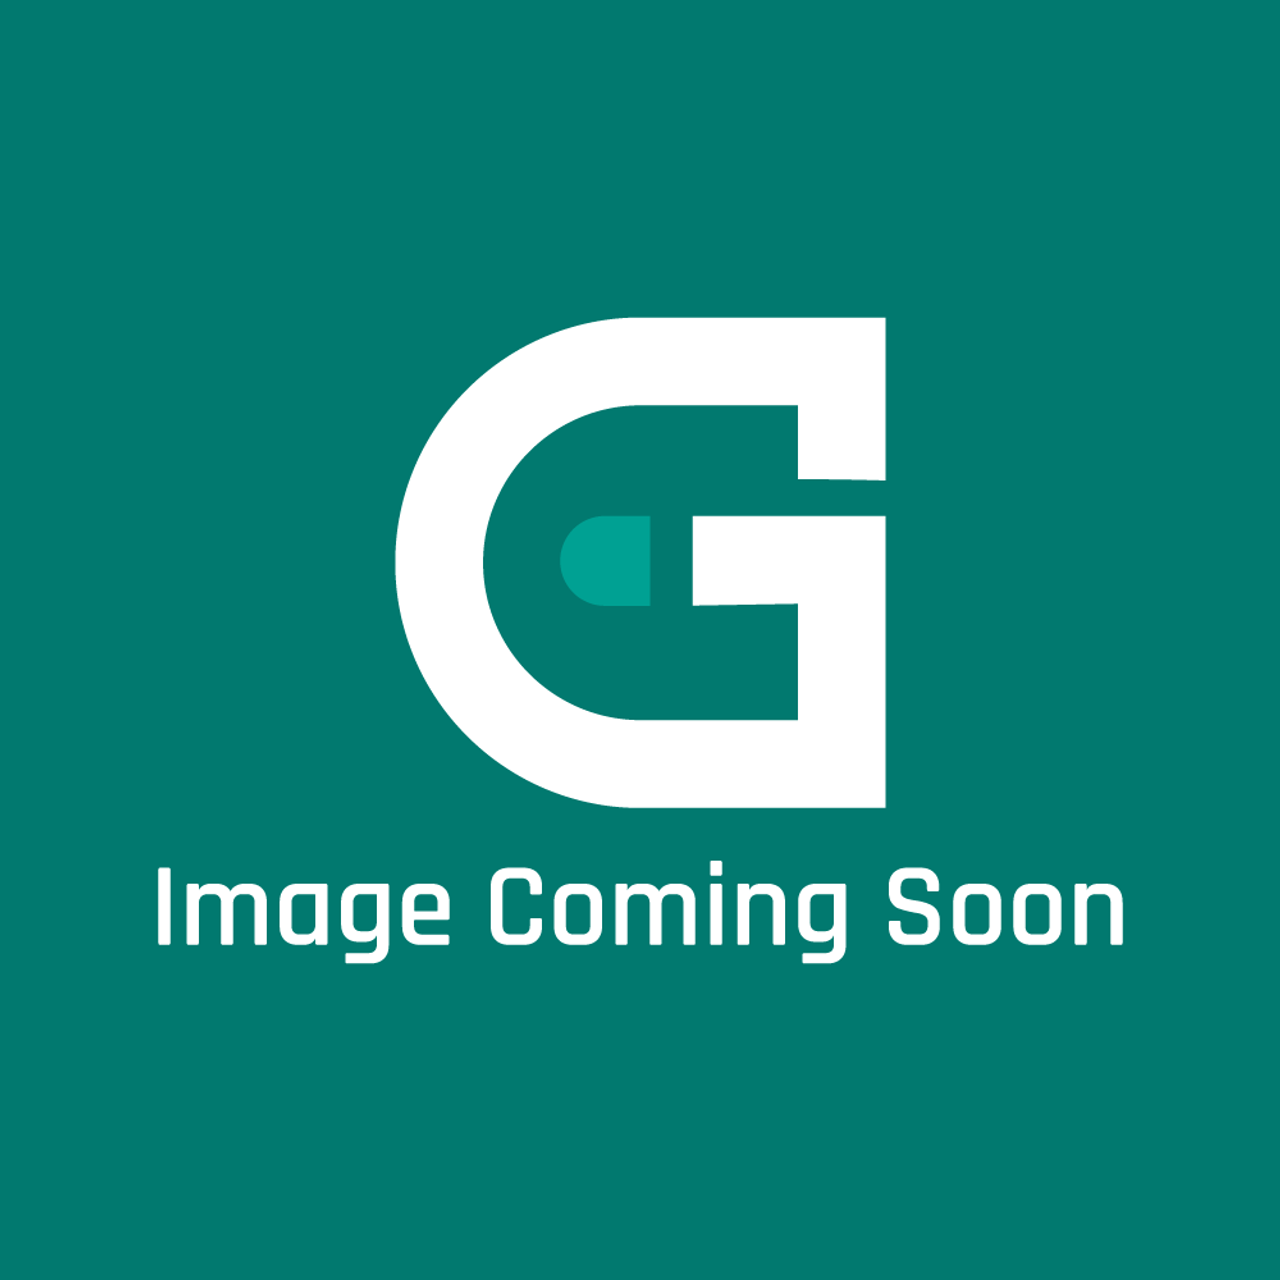 Frigidaire - Electrolux 316462890 Controller - Image Coming Soon!